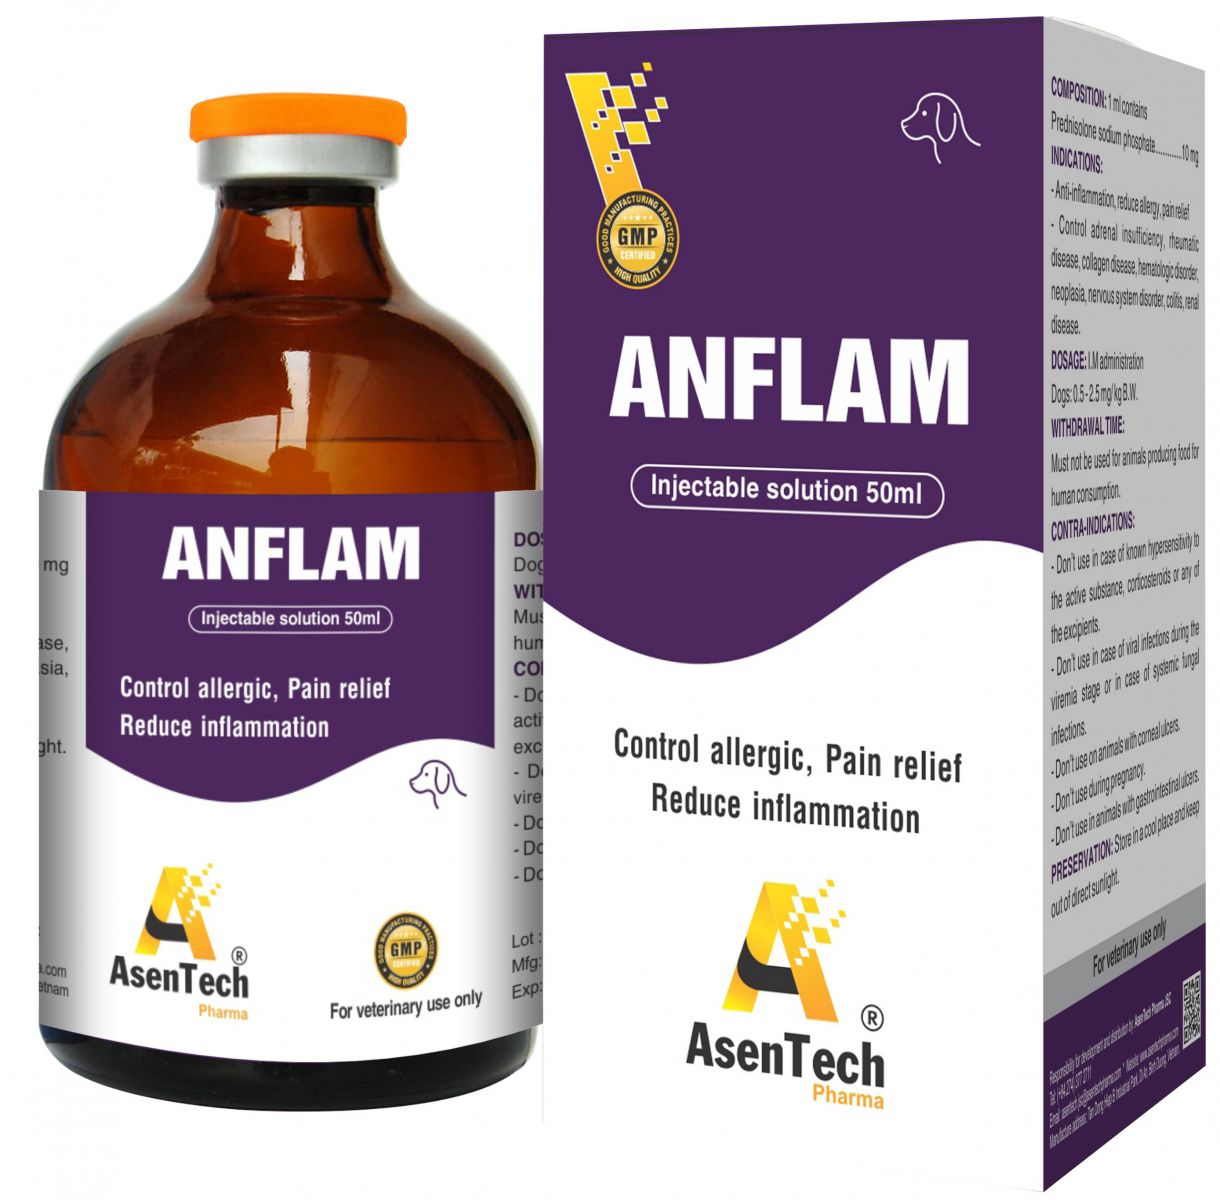 ANFLAM